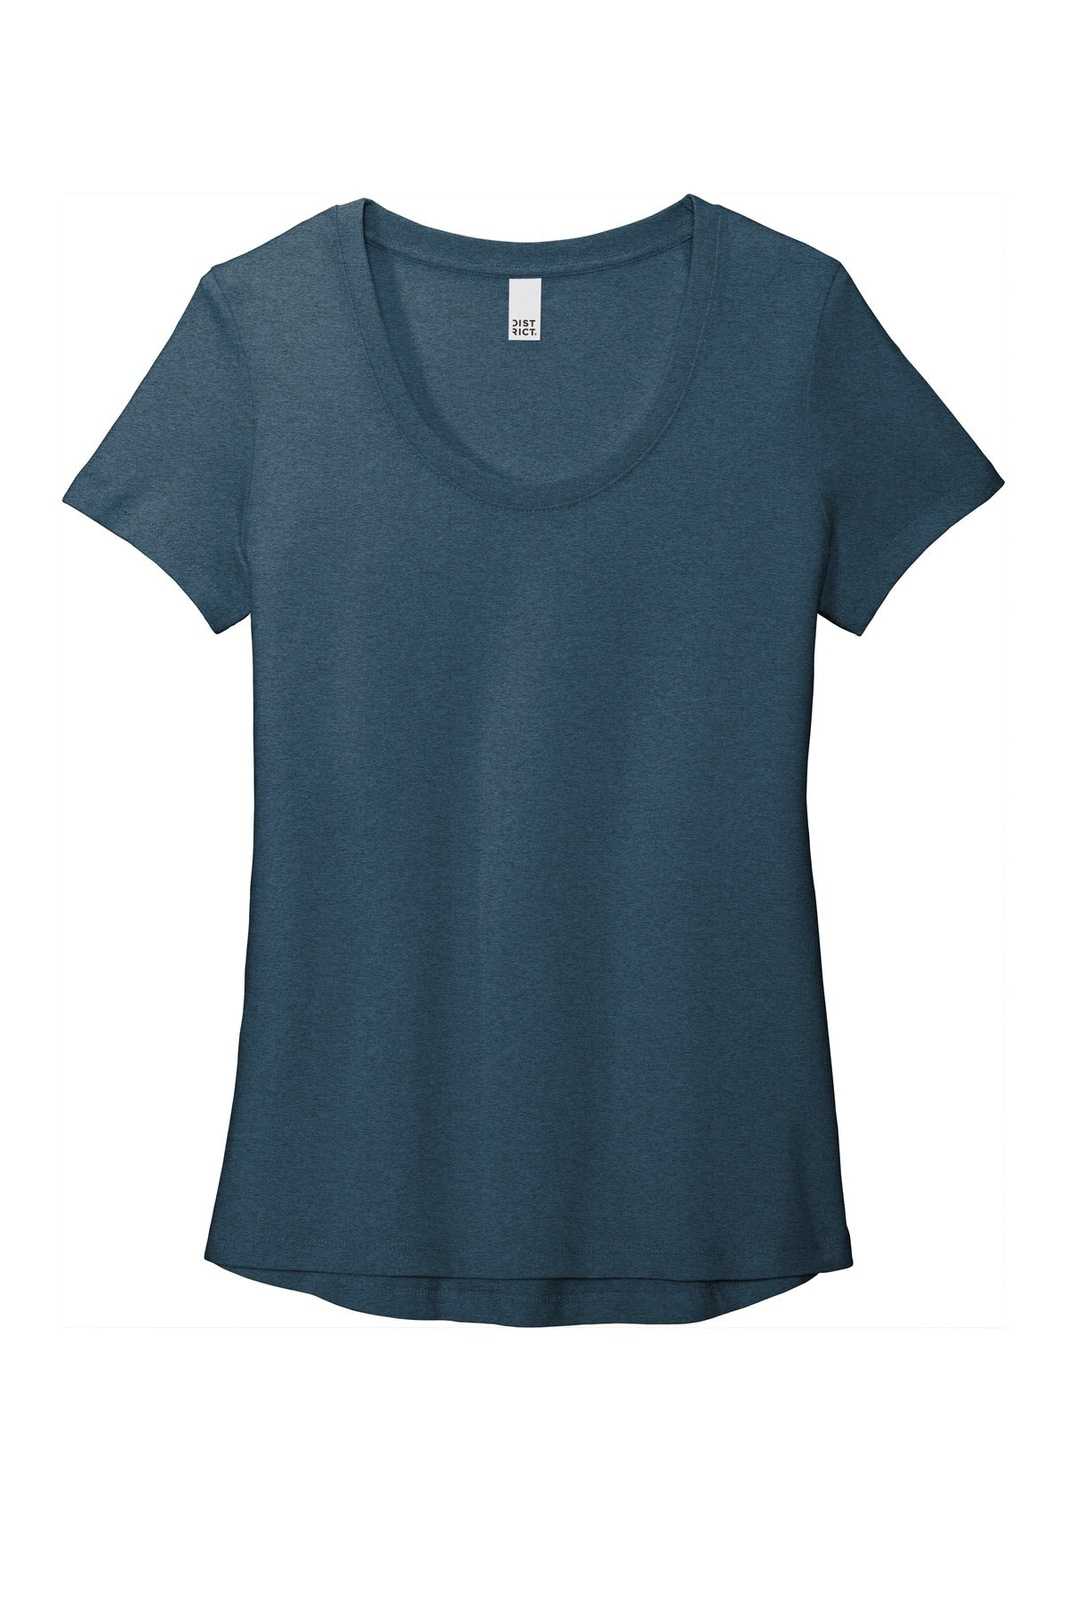 District DT7501 Womens Flex Scoop Neck Tee - Heathered Neptune Blue - HIT a Double - 5